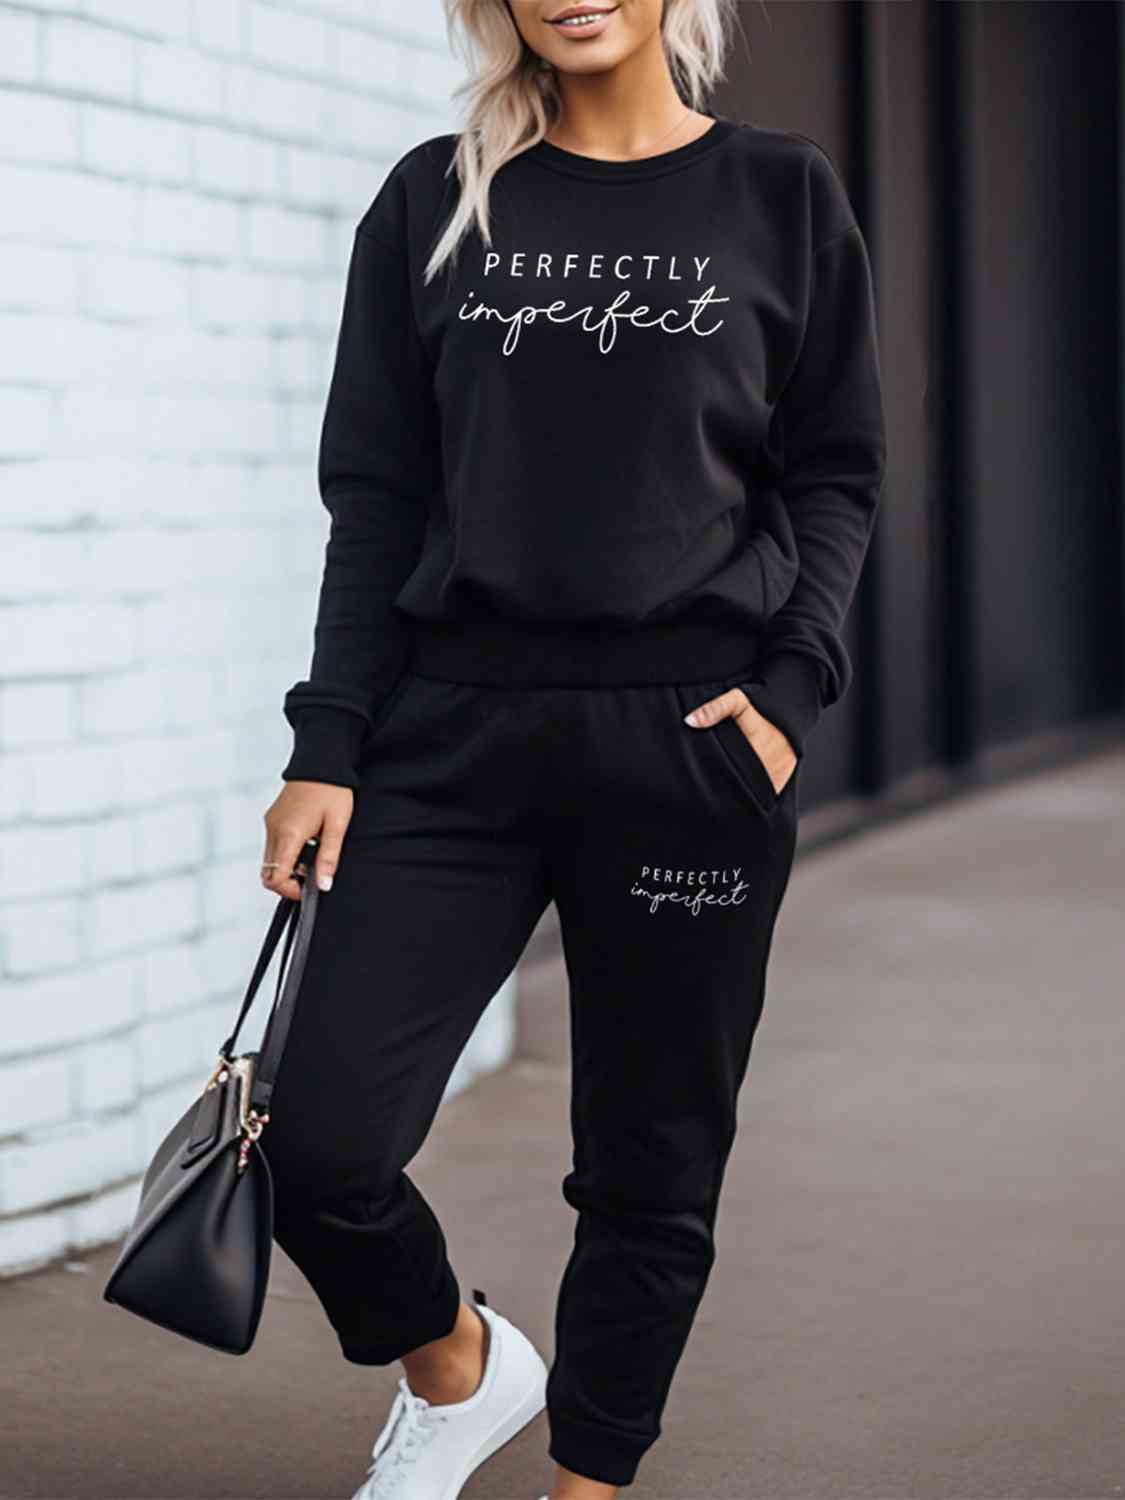 PERFECTLY IMPERFECT Graphic Sweatshirt and Sweatpants Set - Posh Country Lifestyle Marketplace